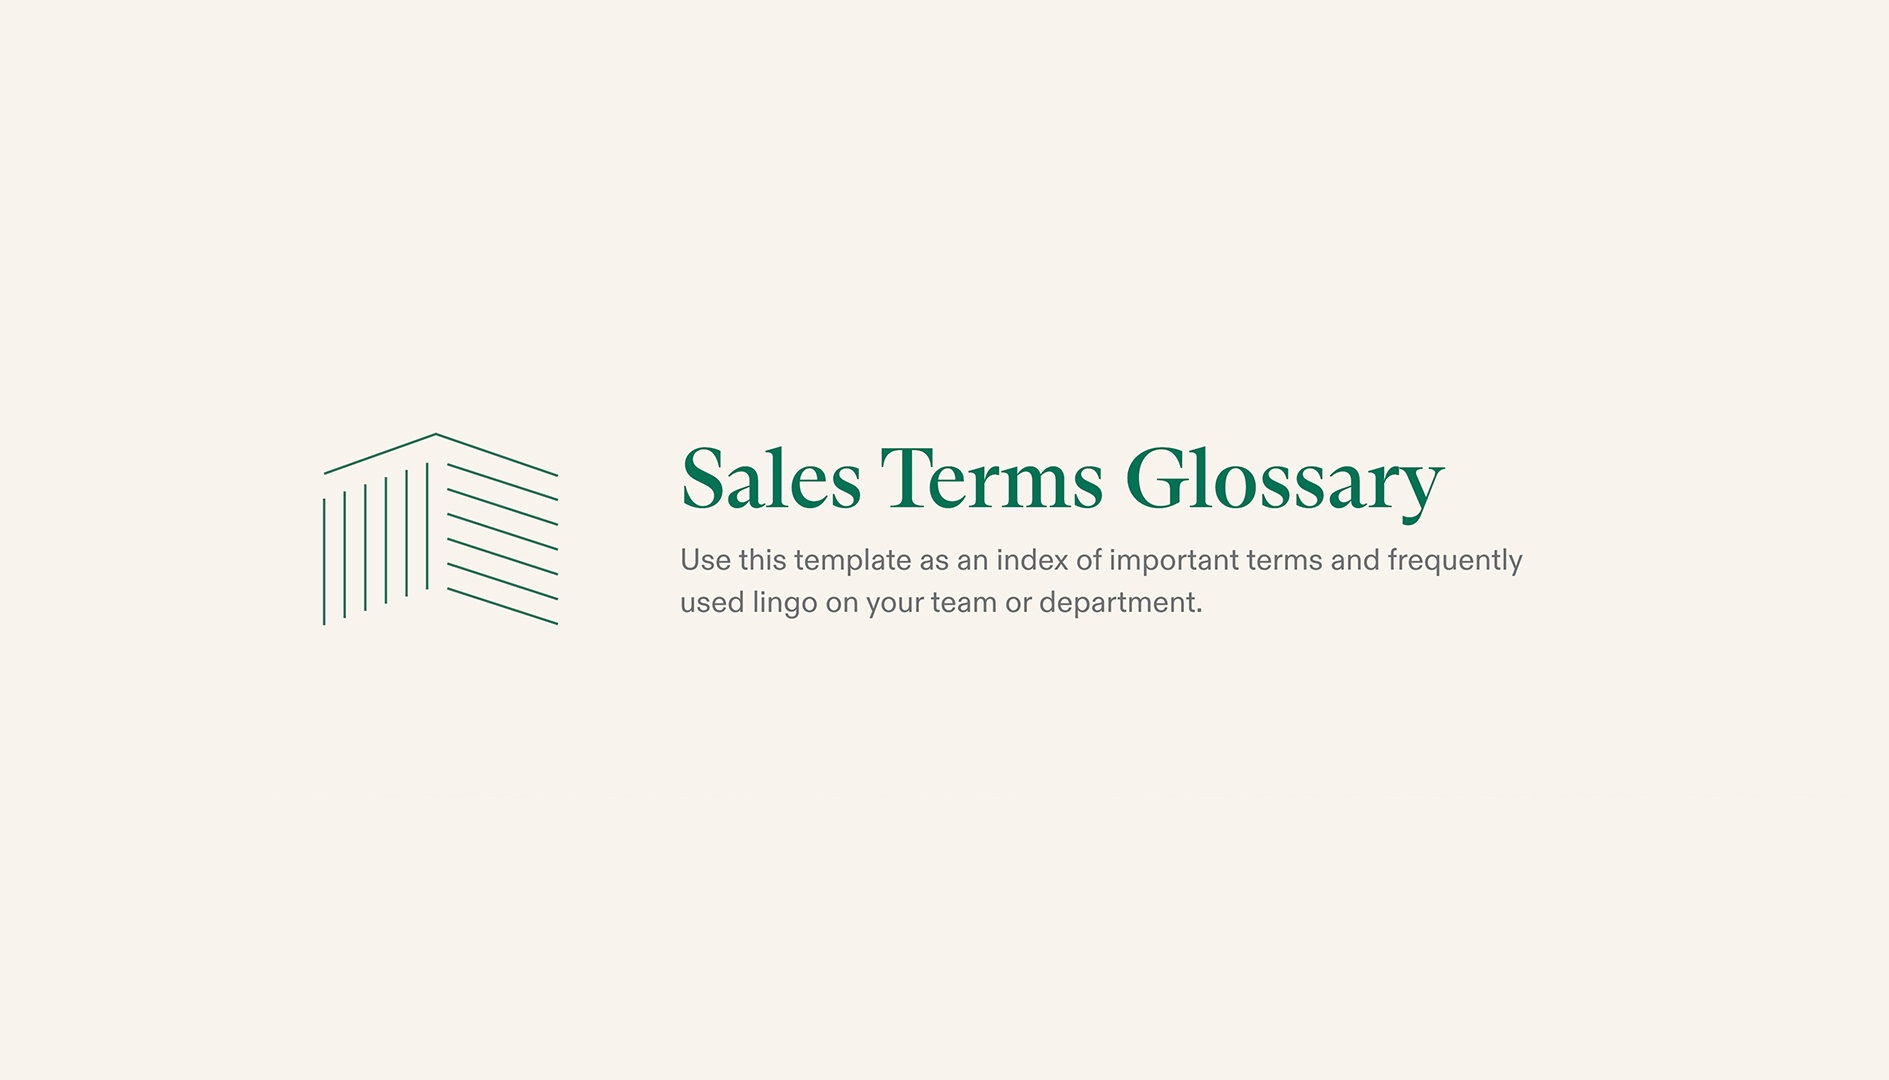 Sales Terms Glossary - Title